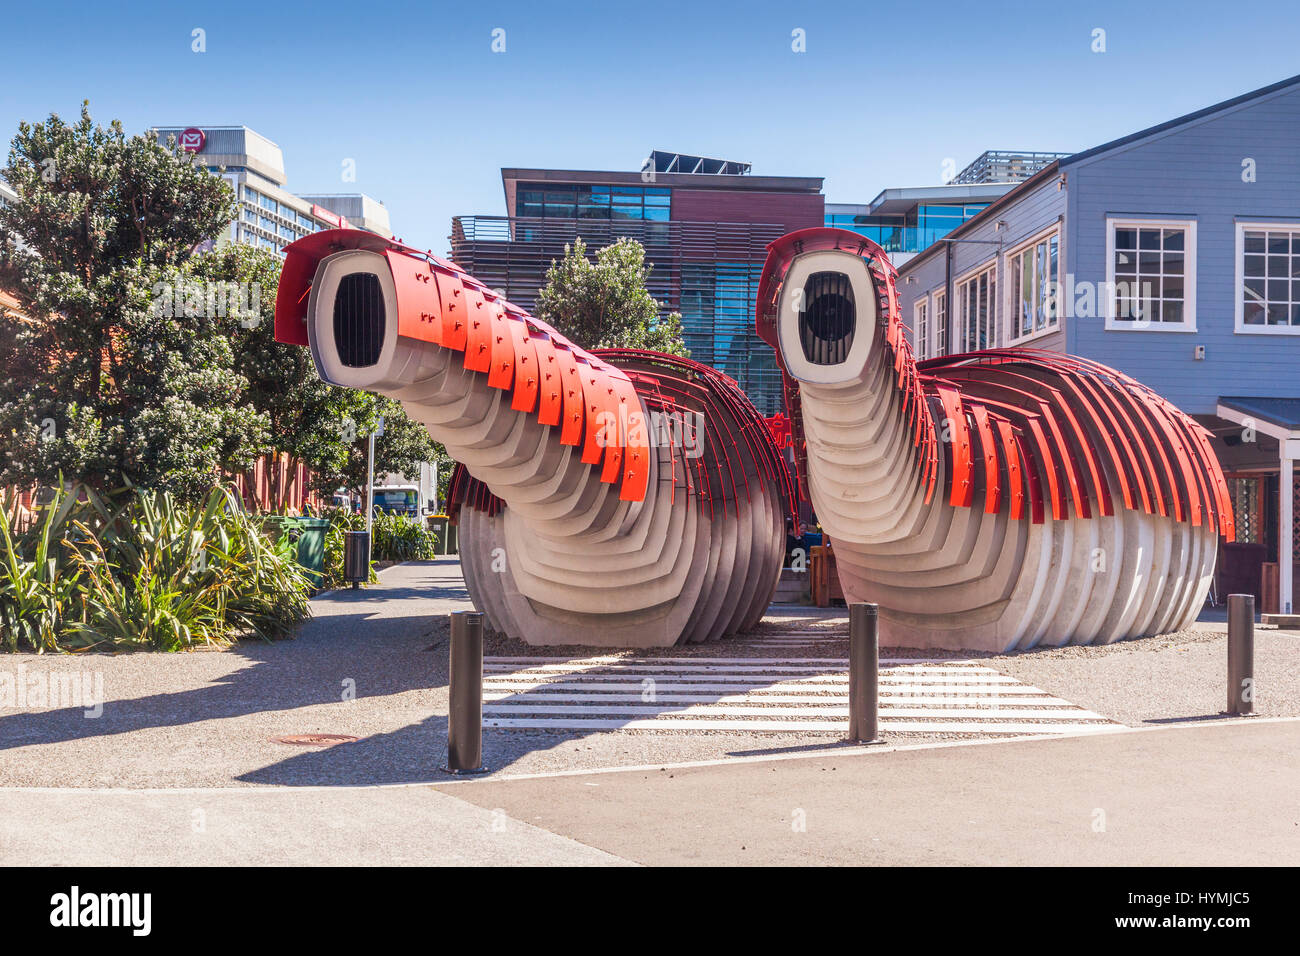 Lobster Toilets in the Kumutoto public space on Queen's Wharf, Wellington Waterfront. Public toilets are situated in the back of these structures. Stock Photo